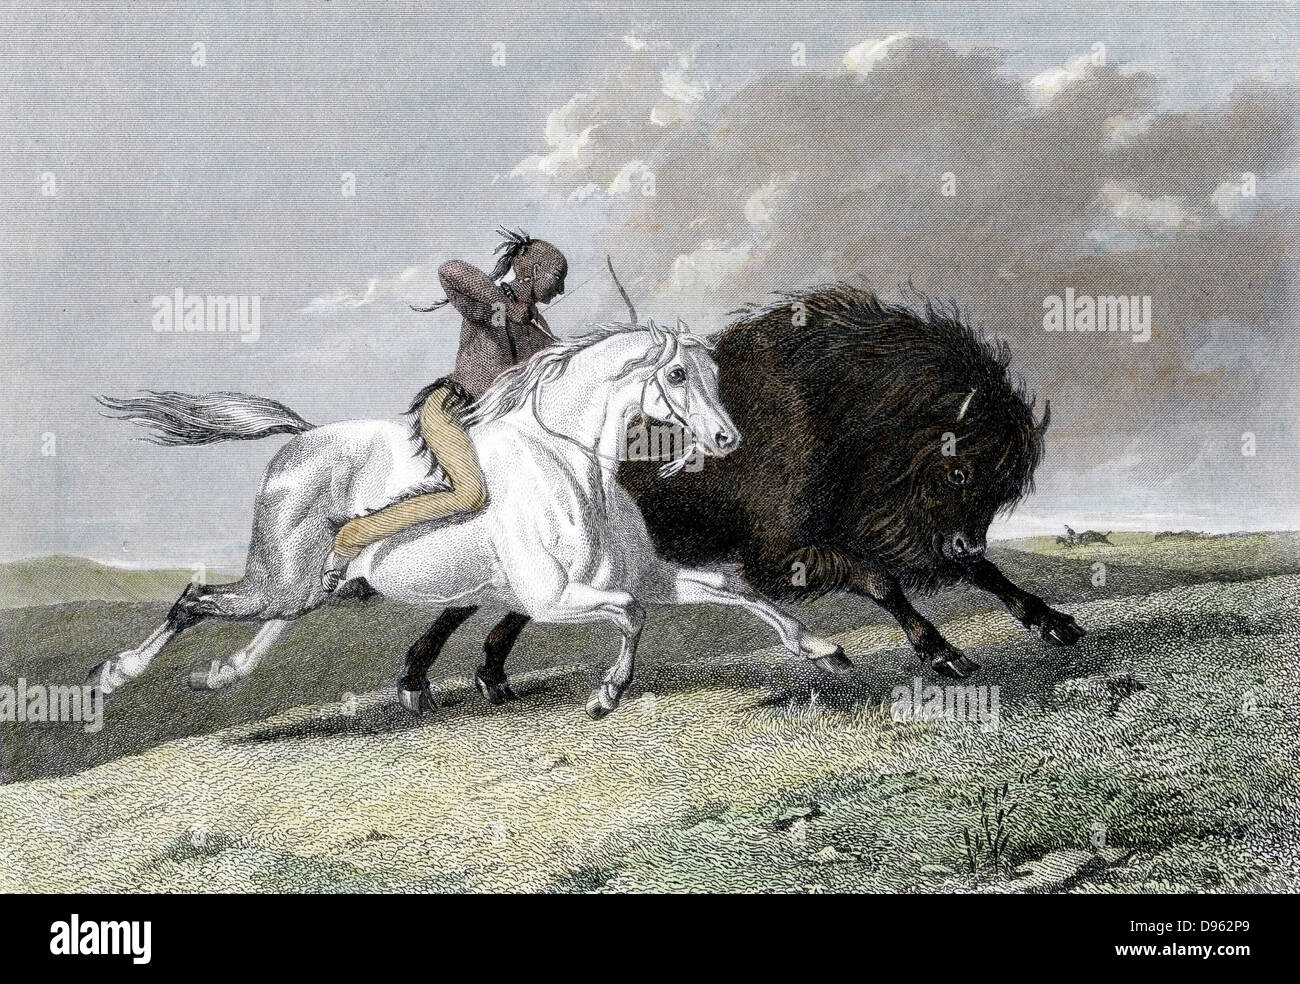 North American Indian, mounted on horse, hunting buffalo (Noth American Bison) with a bow and arrow. Hand-coloured engraving 1861. Stock Photo